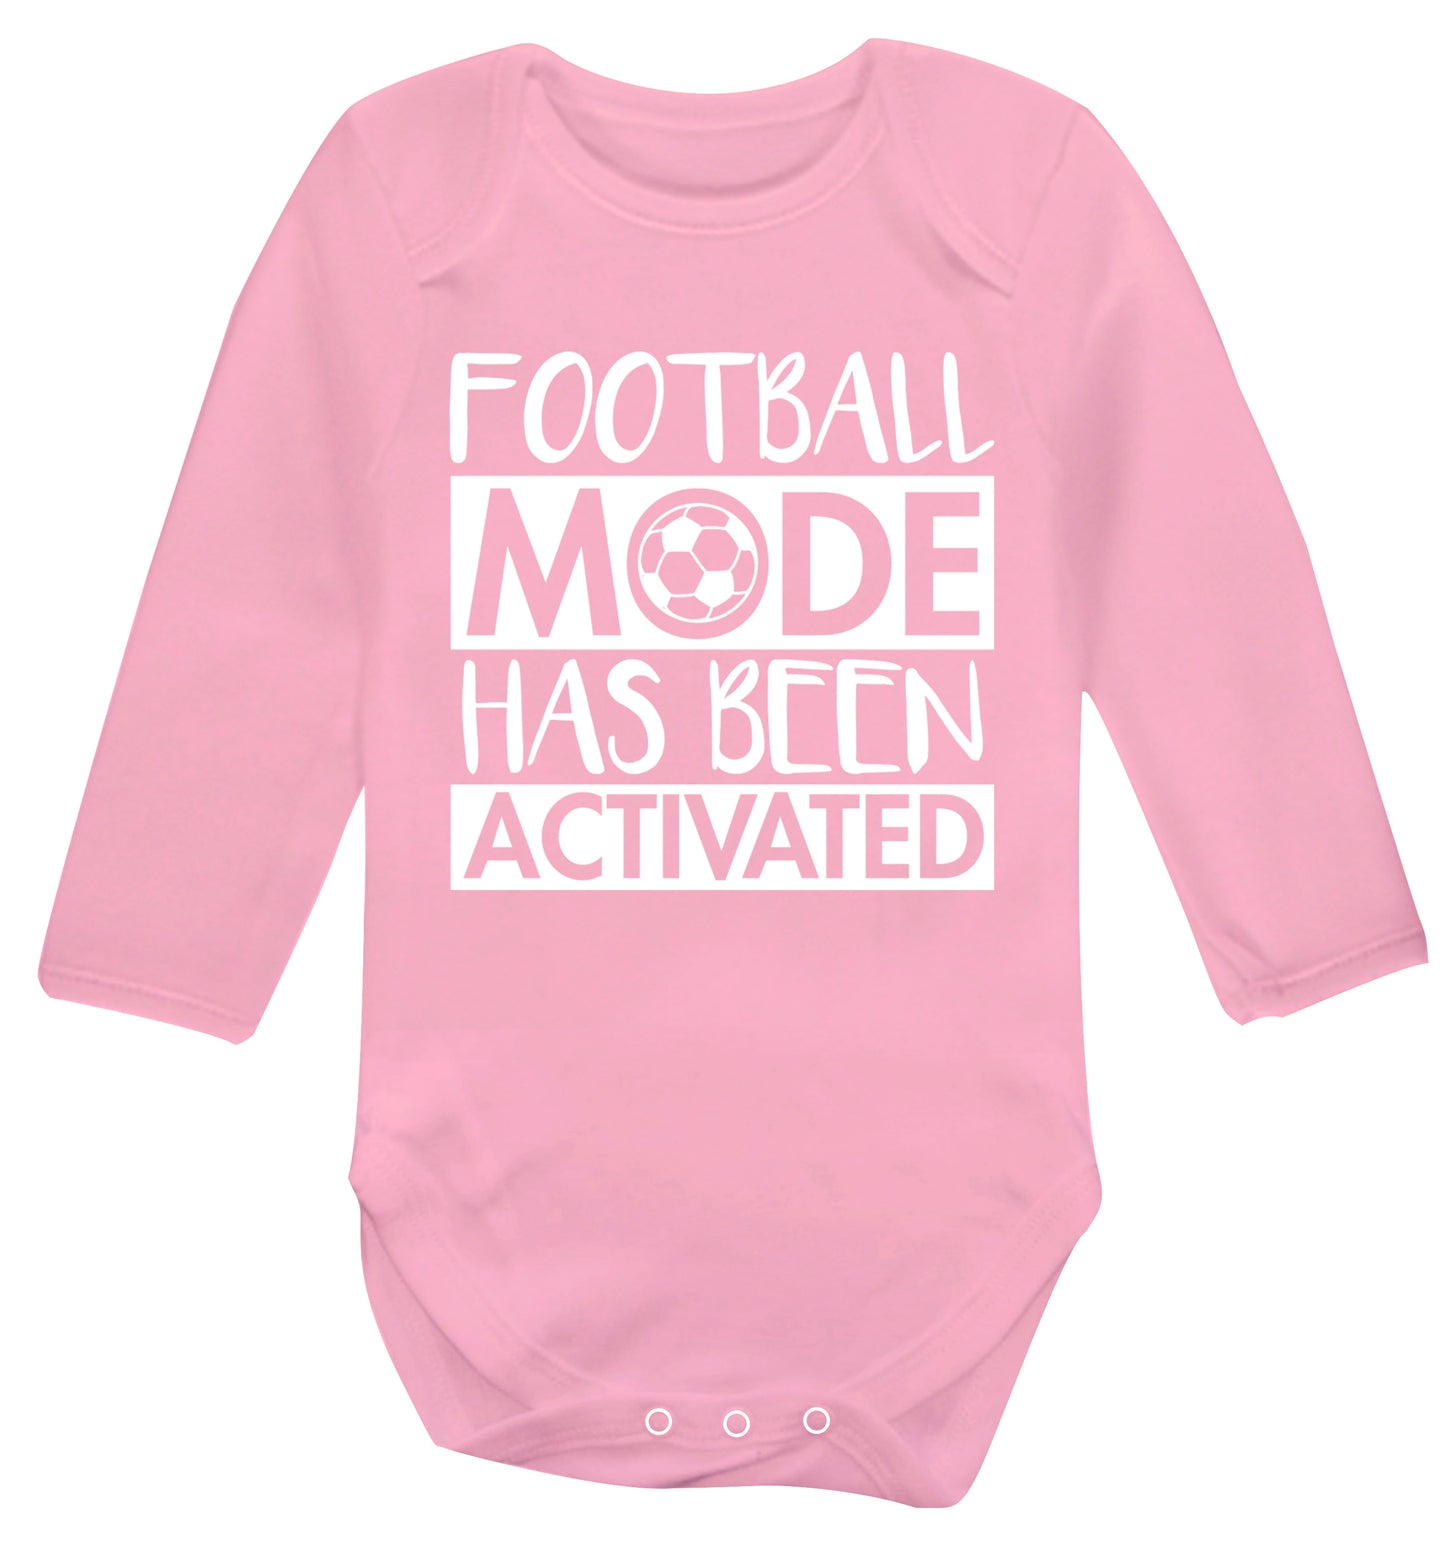 Football mode has been activated Baby Vest long sleeved pale pink 6-12 months